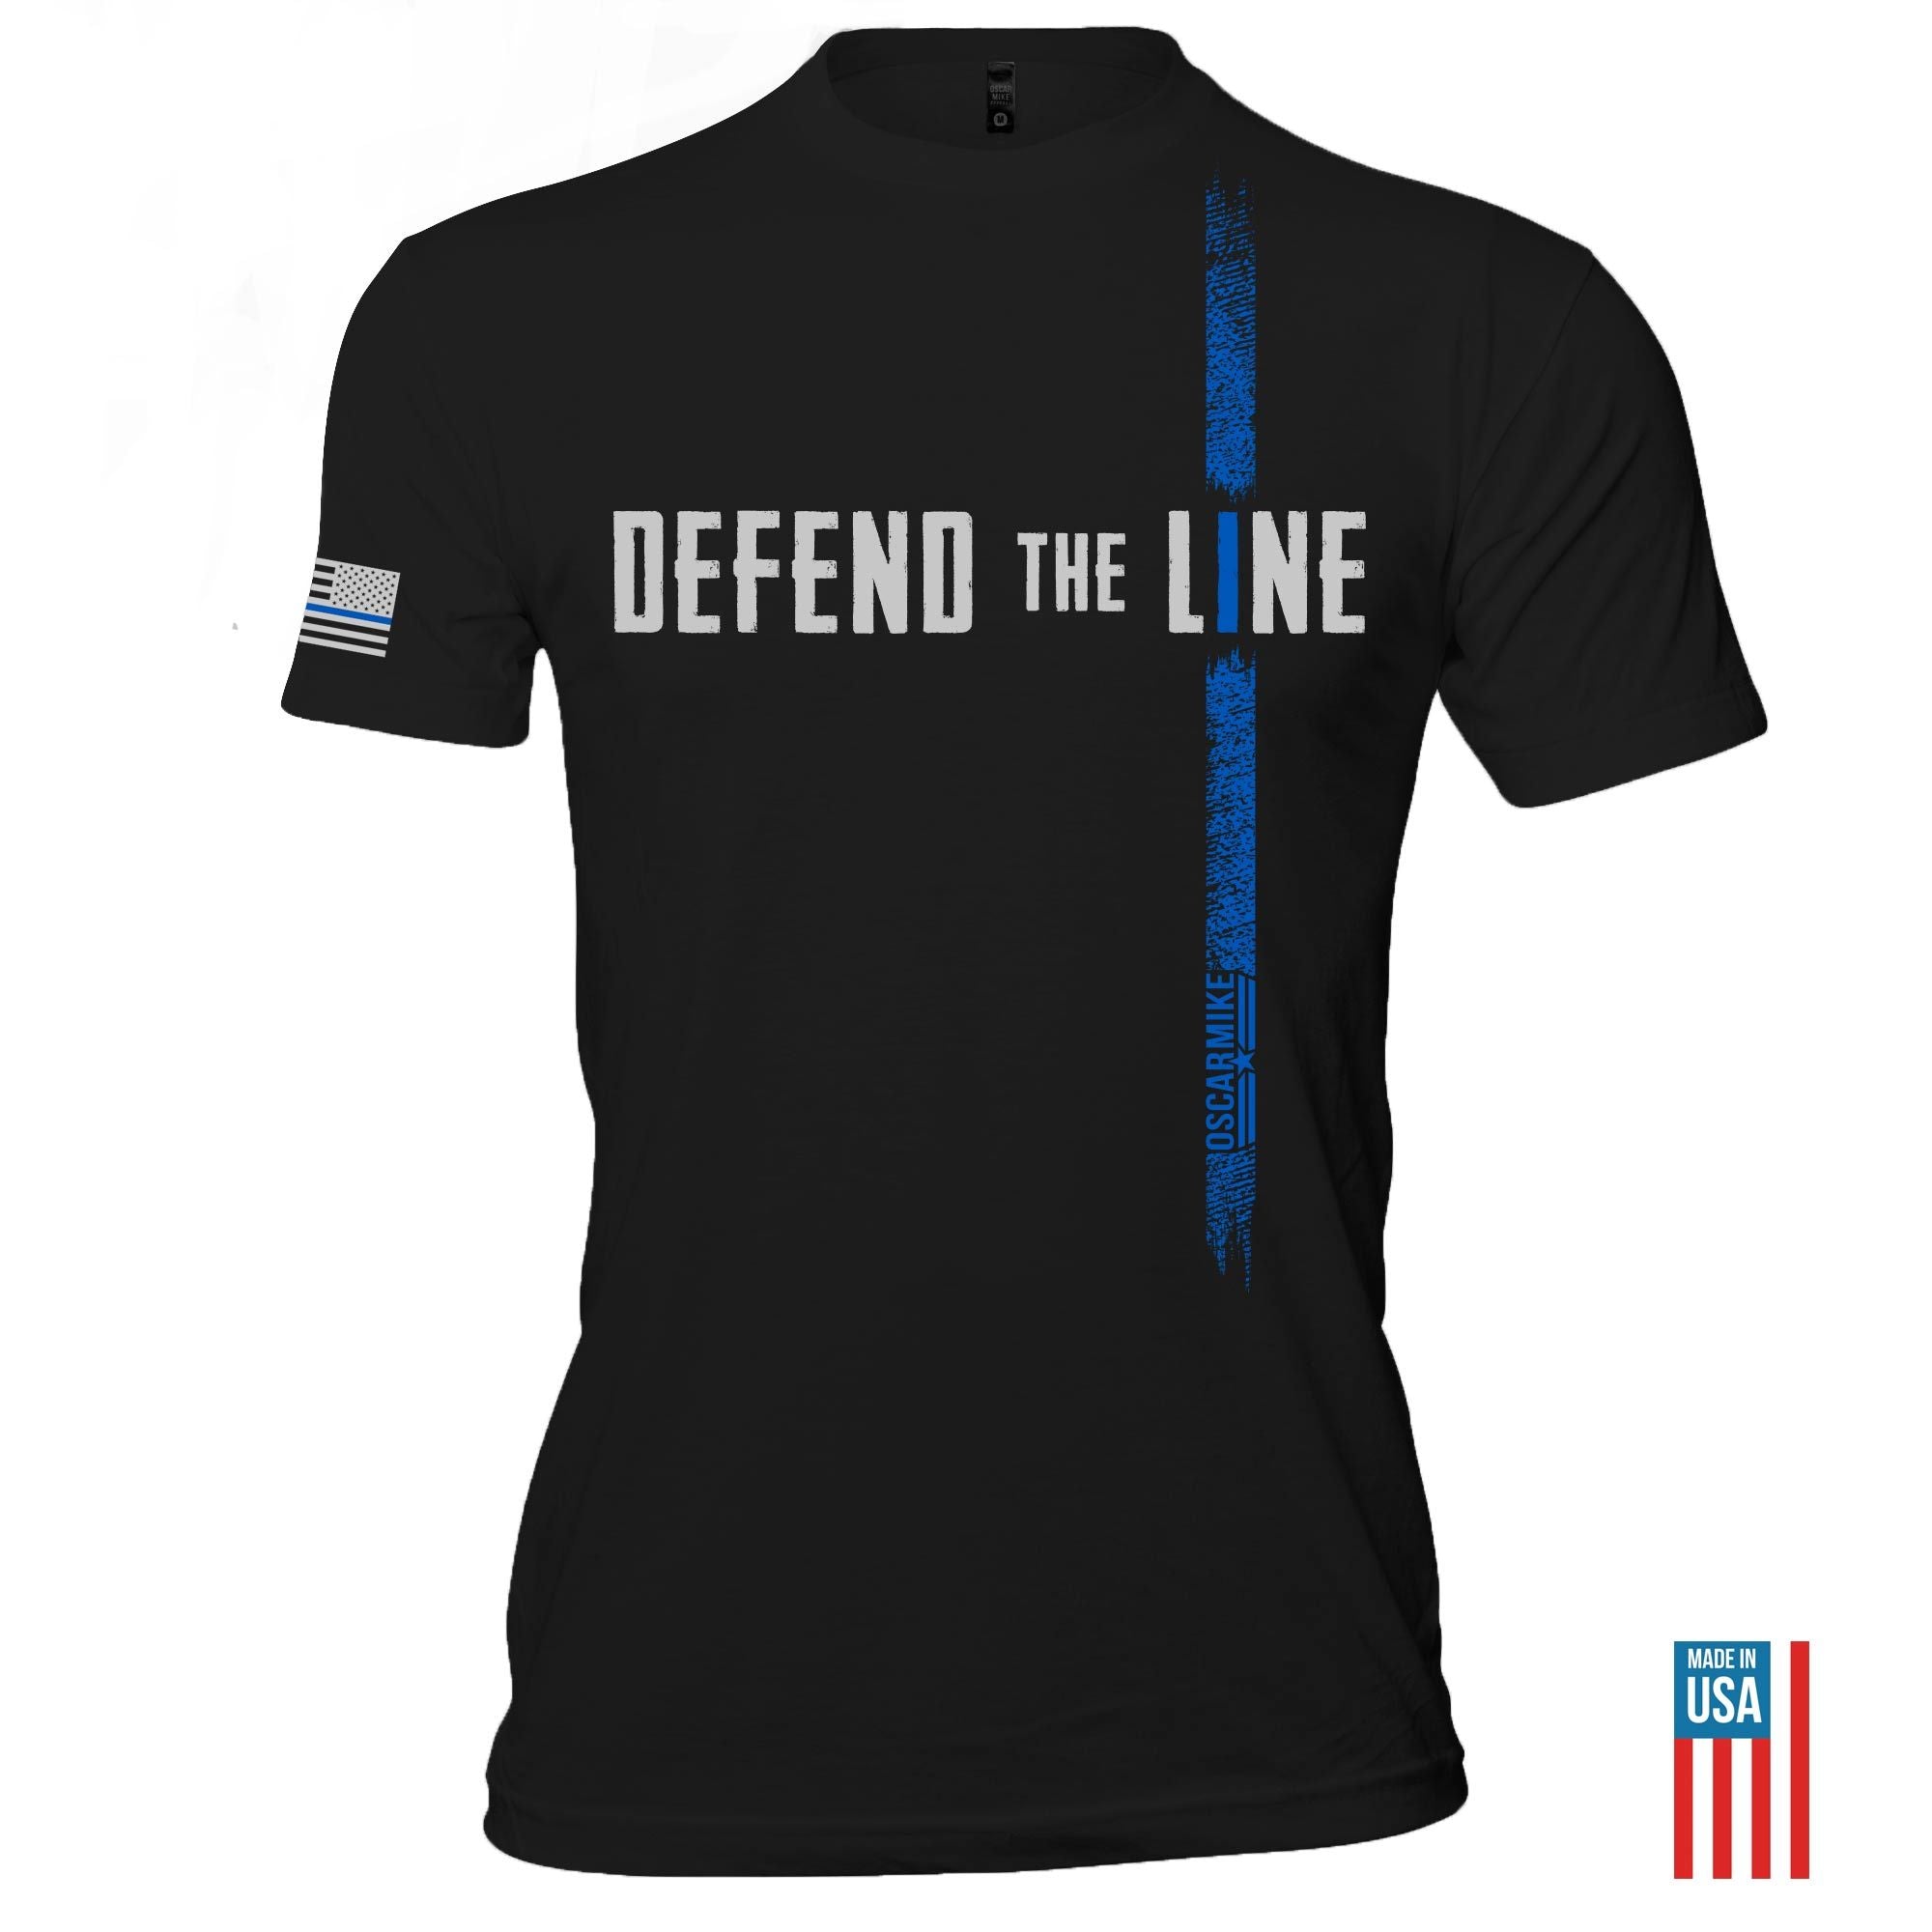 Defend The Line Tee T-Shirt from Oscar Mike Apparel